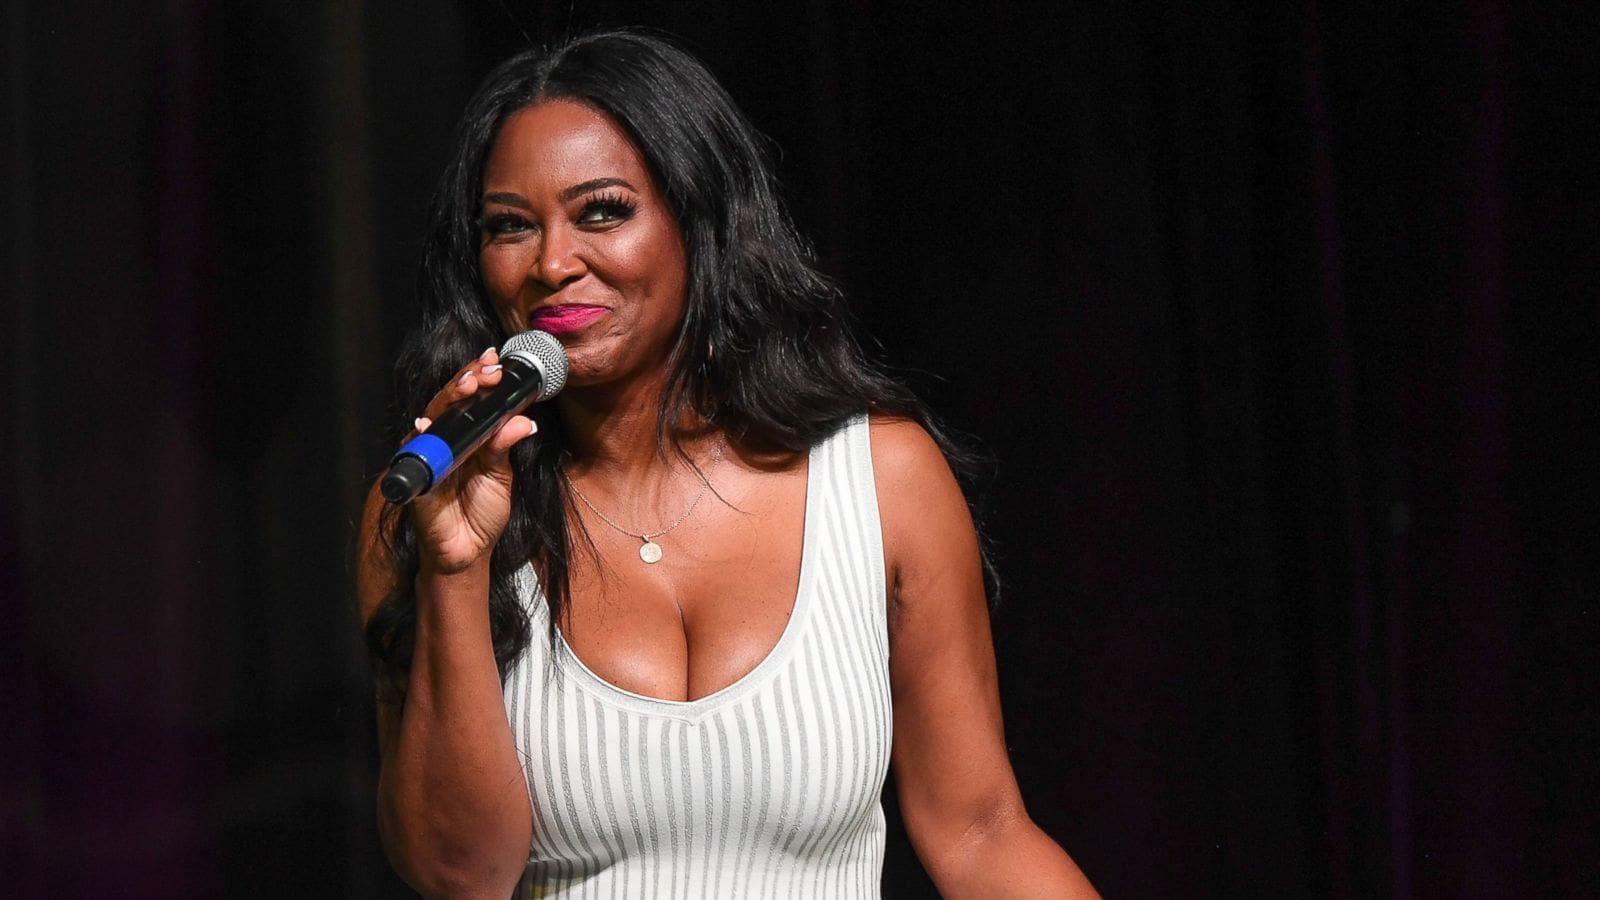 Kenya Moore's Latest Photo Has Fans Praising Her Natural Beauty